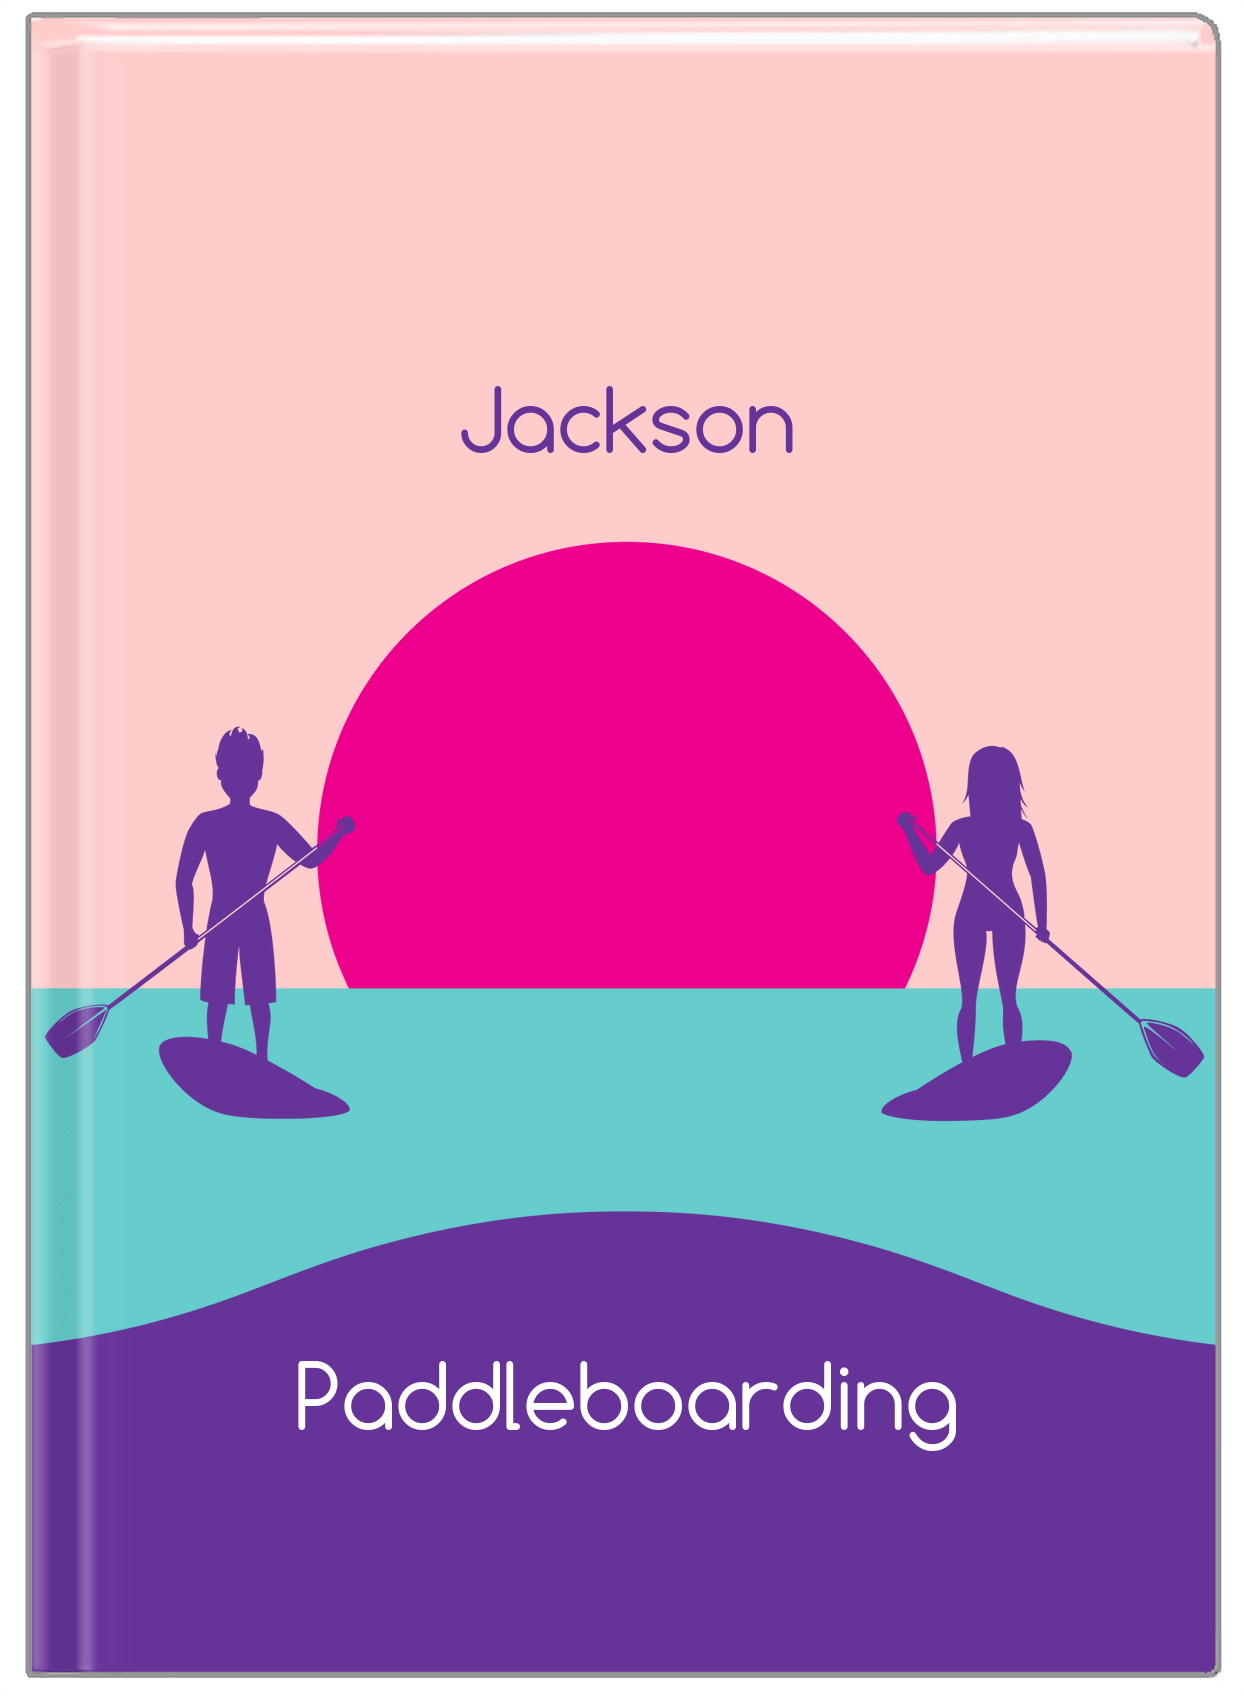 Personalized Beach Journal XI - Paddleboarding - Pink Background - Front View